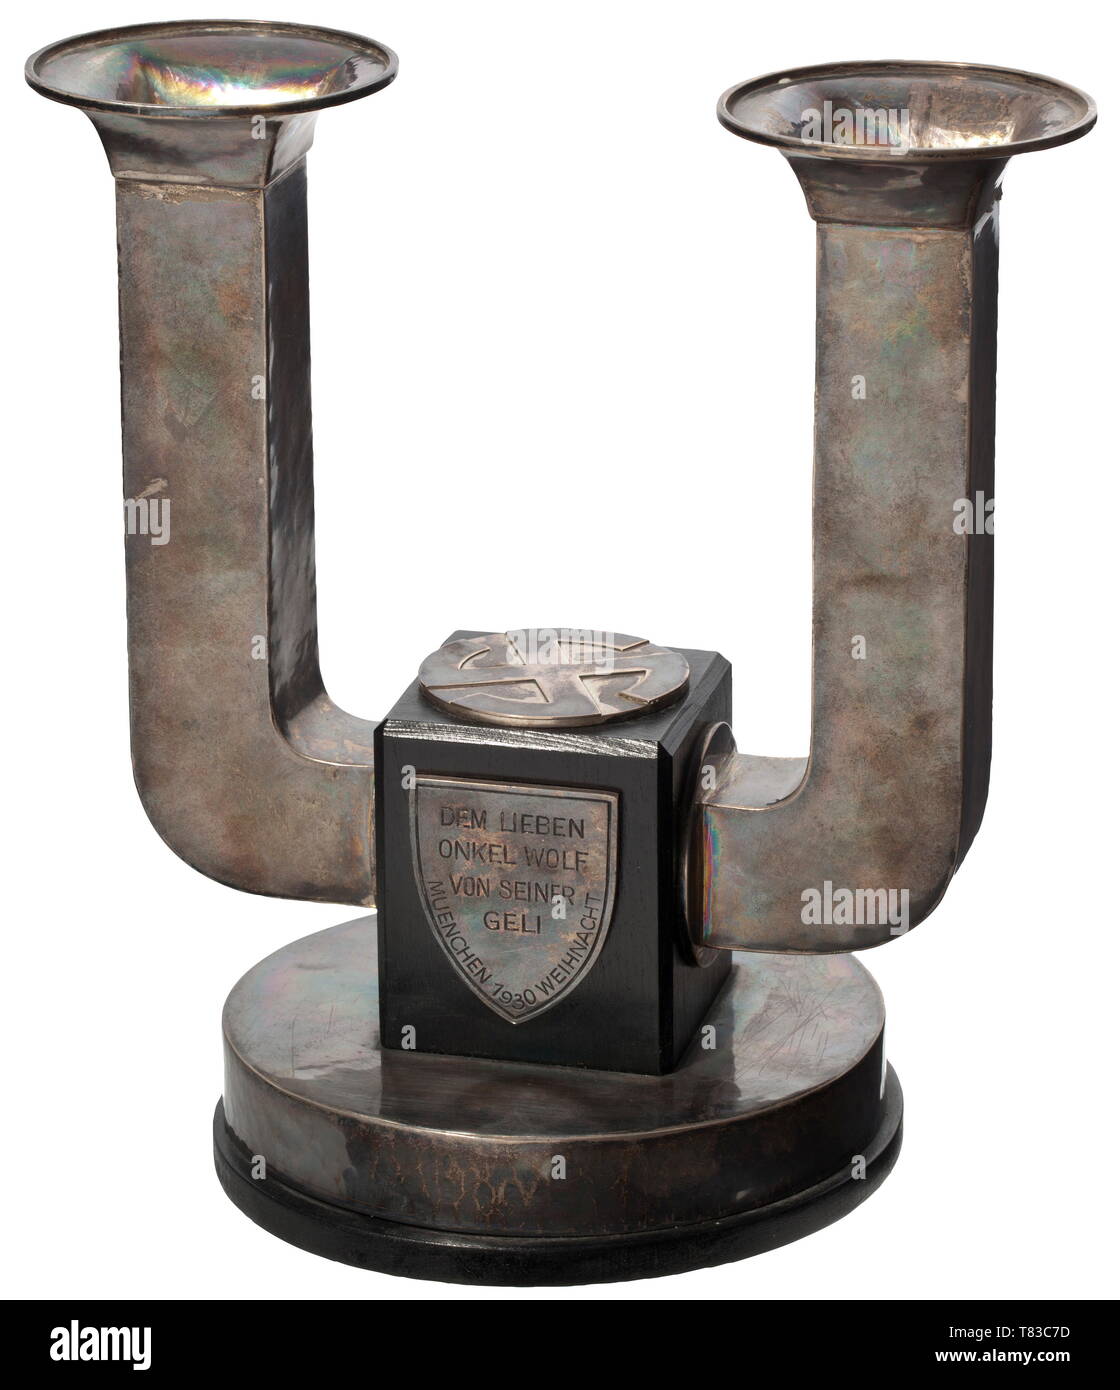 Angela 'Geli' Raubal (1908 - 1931) - a silver candlestick, a present to Adolf Hitler In Art Deco style, the surface with fine hammer marks, the central section of dark wood with swastika applied at top, engraved Munich coat of arms at front, gift inscription (tr.) 'To my dear Uncle Wolf from his Geli - Munich 1930 - Christmas' at back. Silver smith mark 'CW' beside the towers of the Frauenkirche for the Munich silversmith Carl Weishaupt, also jeweller's inscription (tr.) 'handmade' and mark of fineness '925'. Flat blackened base. Height 21 cm, weight 1046 g. Carl Weishaupt,, Editorial-Use-Only Stock Photo